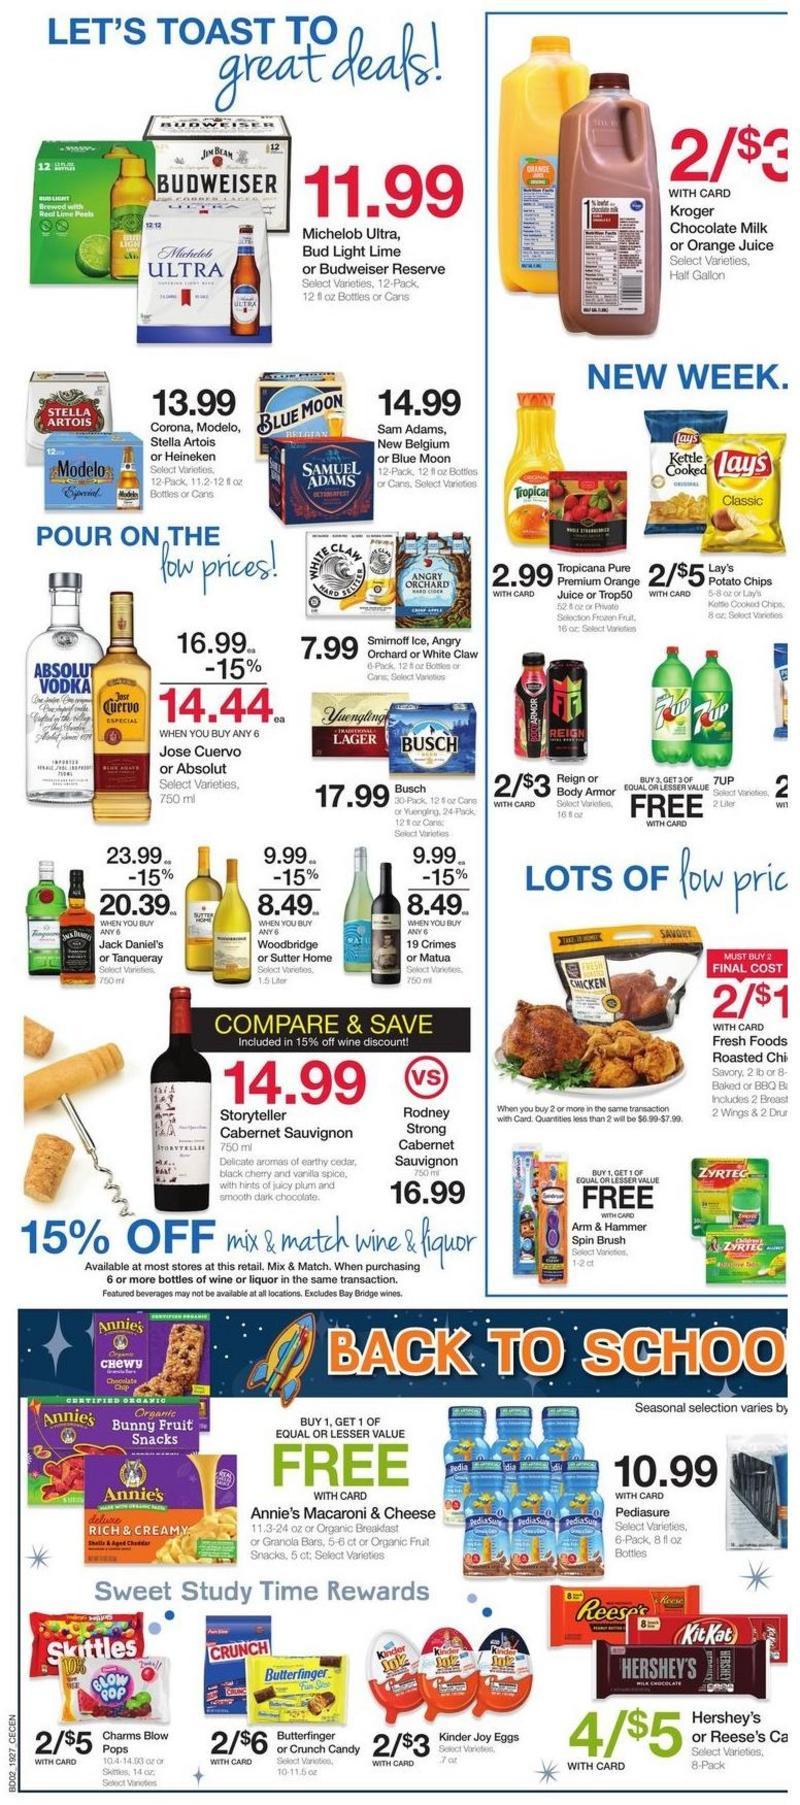 Kroger Weekly Ad from August 7